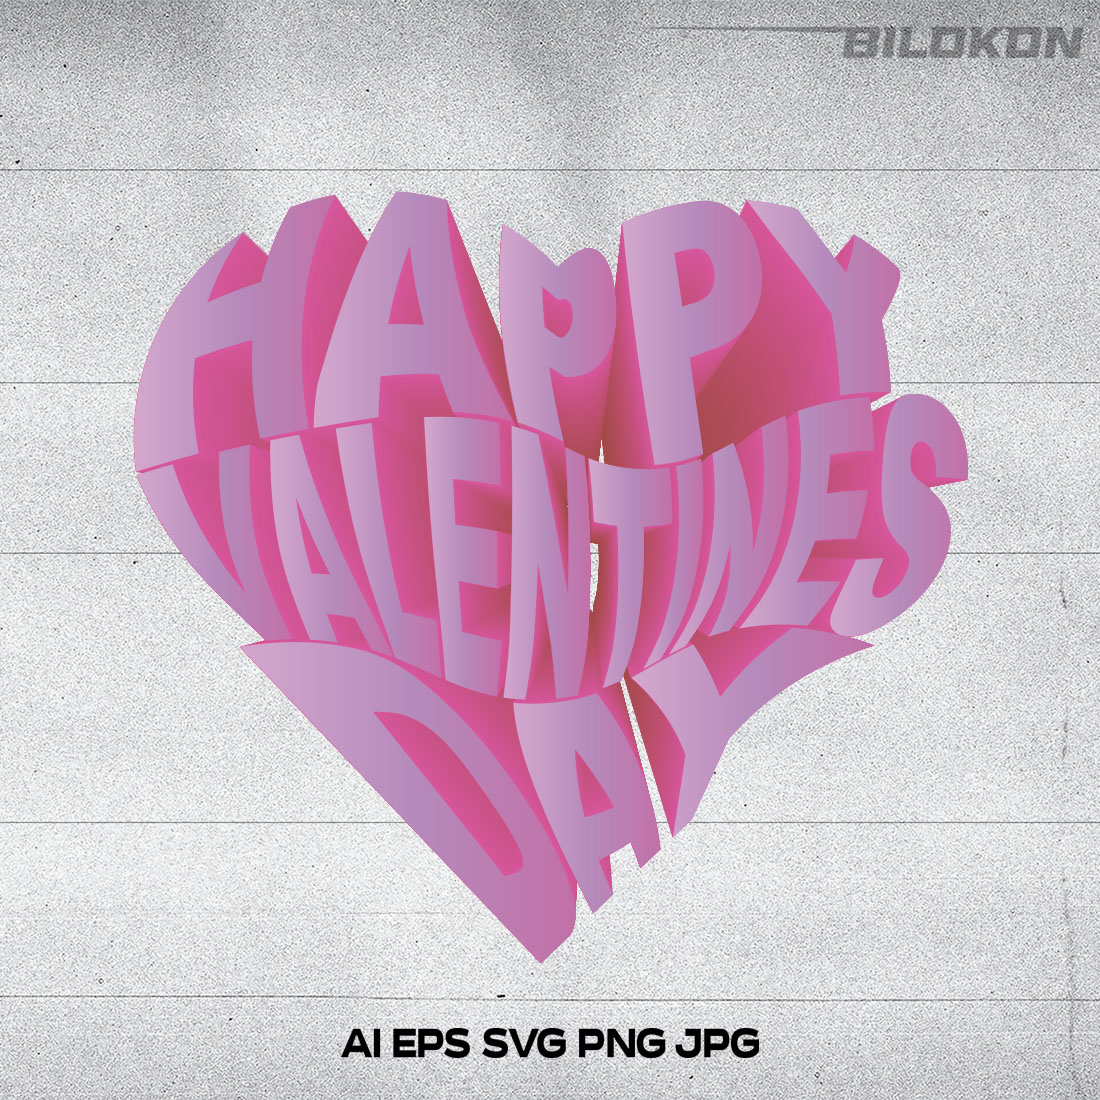 Happy Valentine's Day in Heart Shape 3D SVG Design cover image.